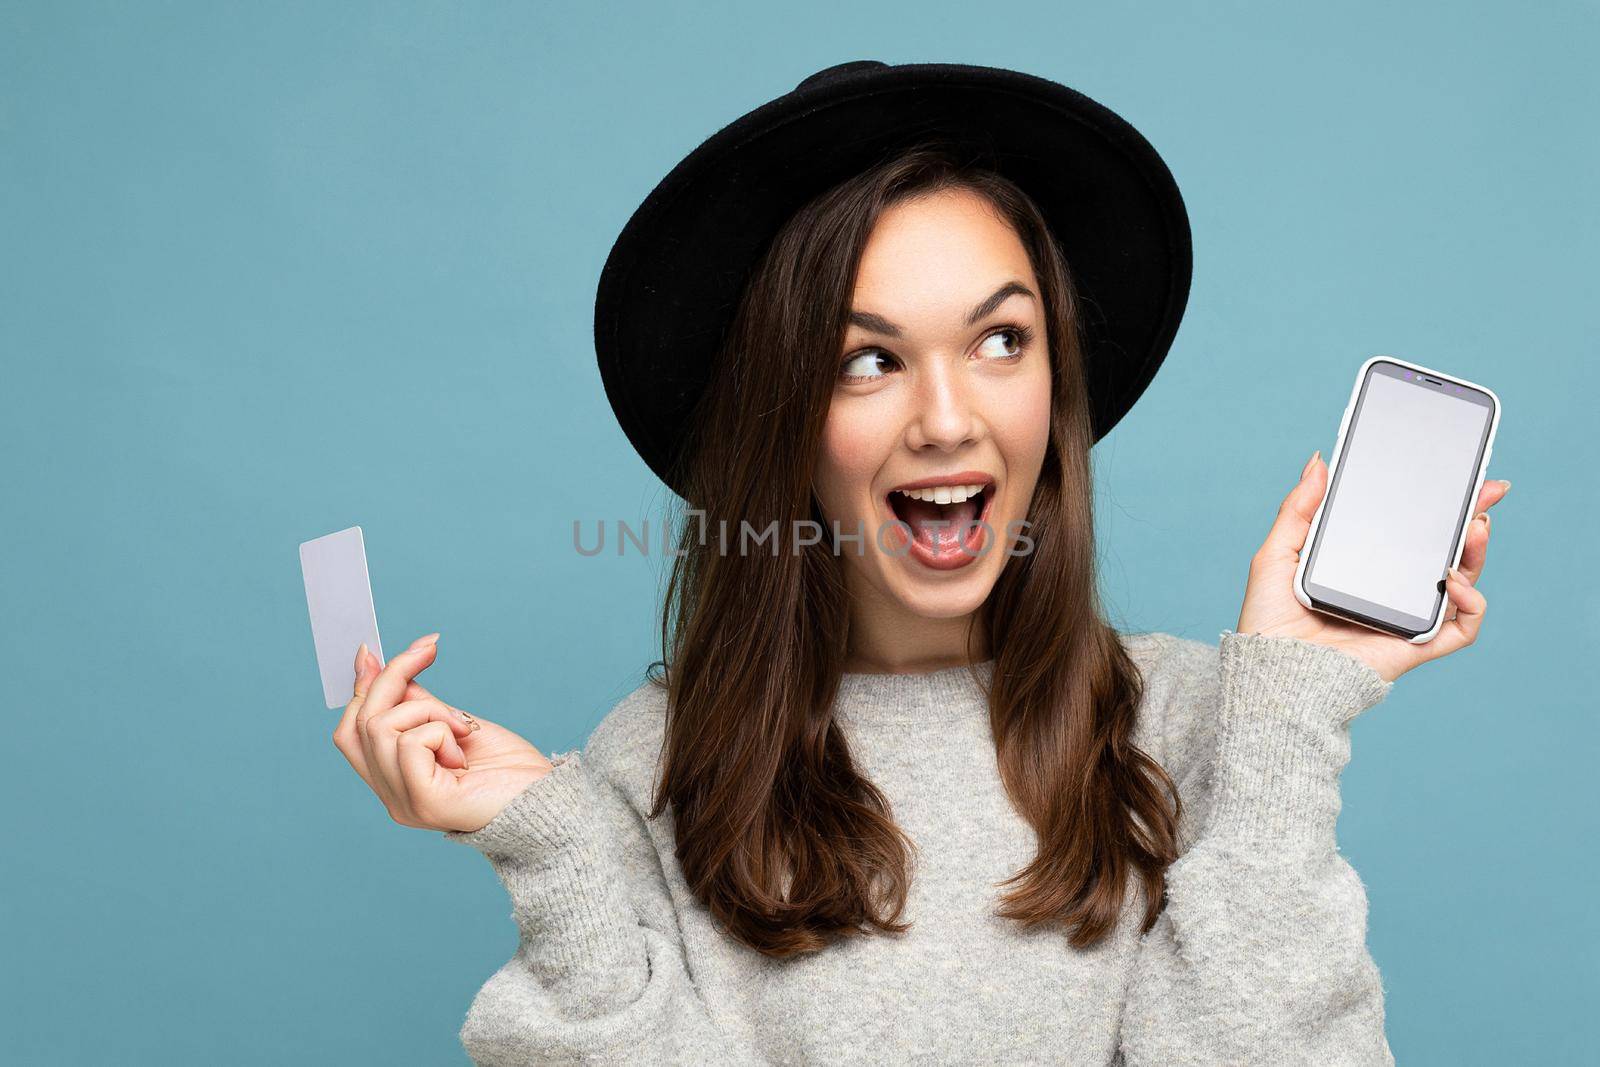 Closeup portrait photo of attractive joyful young brunette woman wearing black hat and grey sweater isolated over blue background holding credit card and mobile phone with empty display for mockup looking to the side.